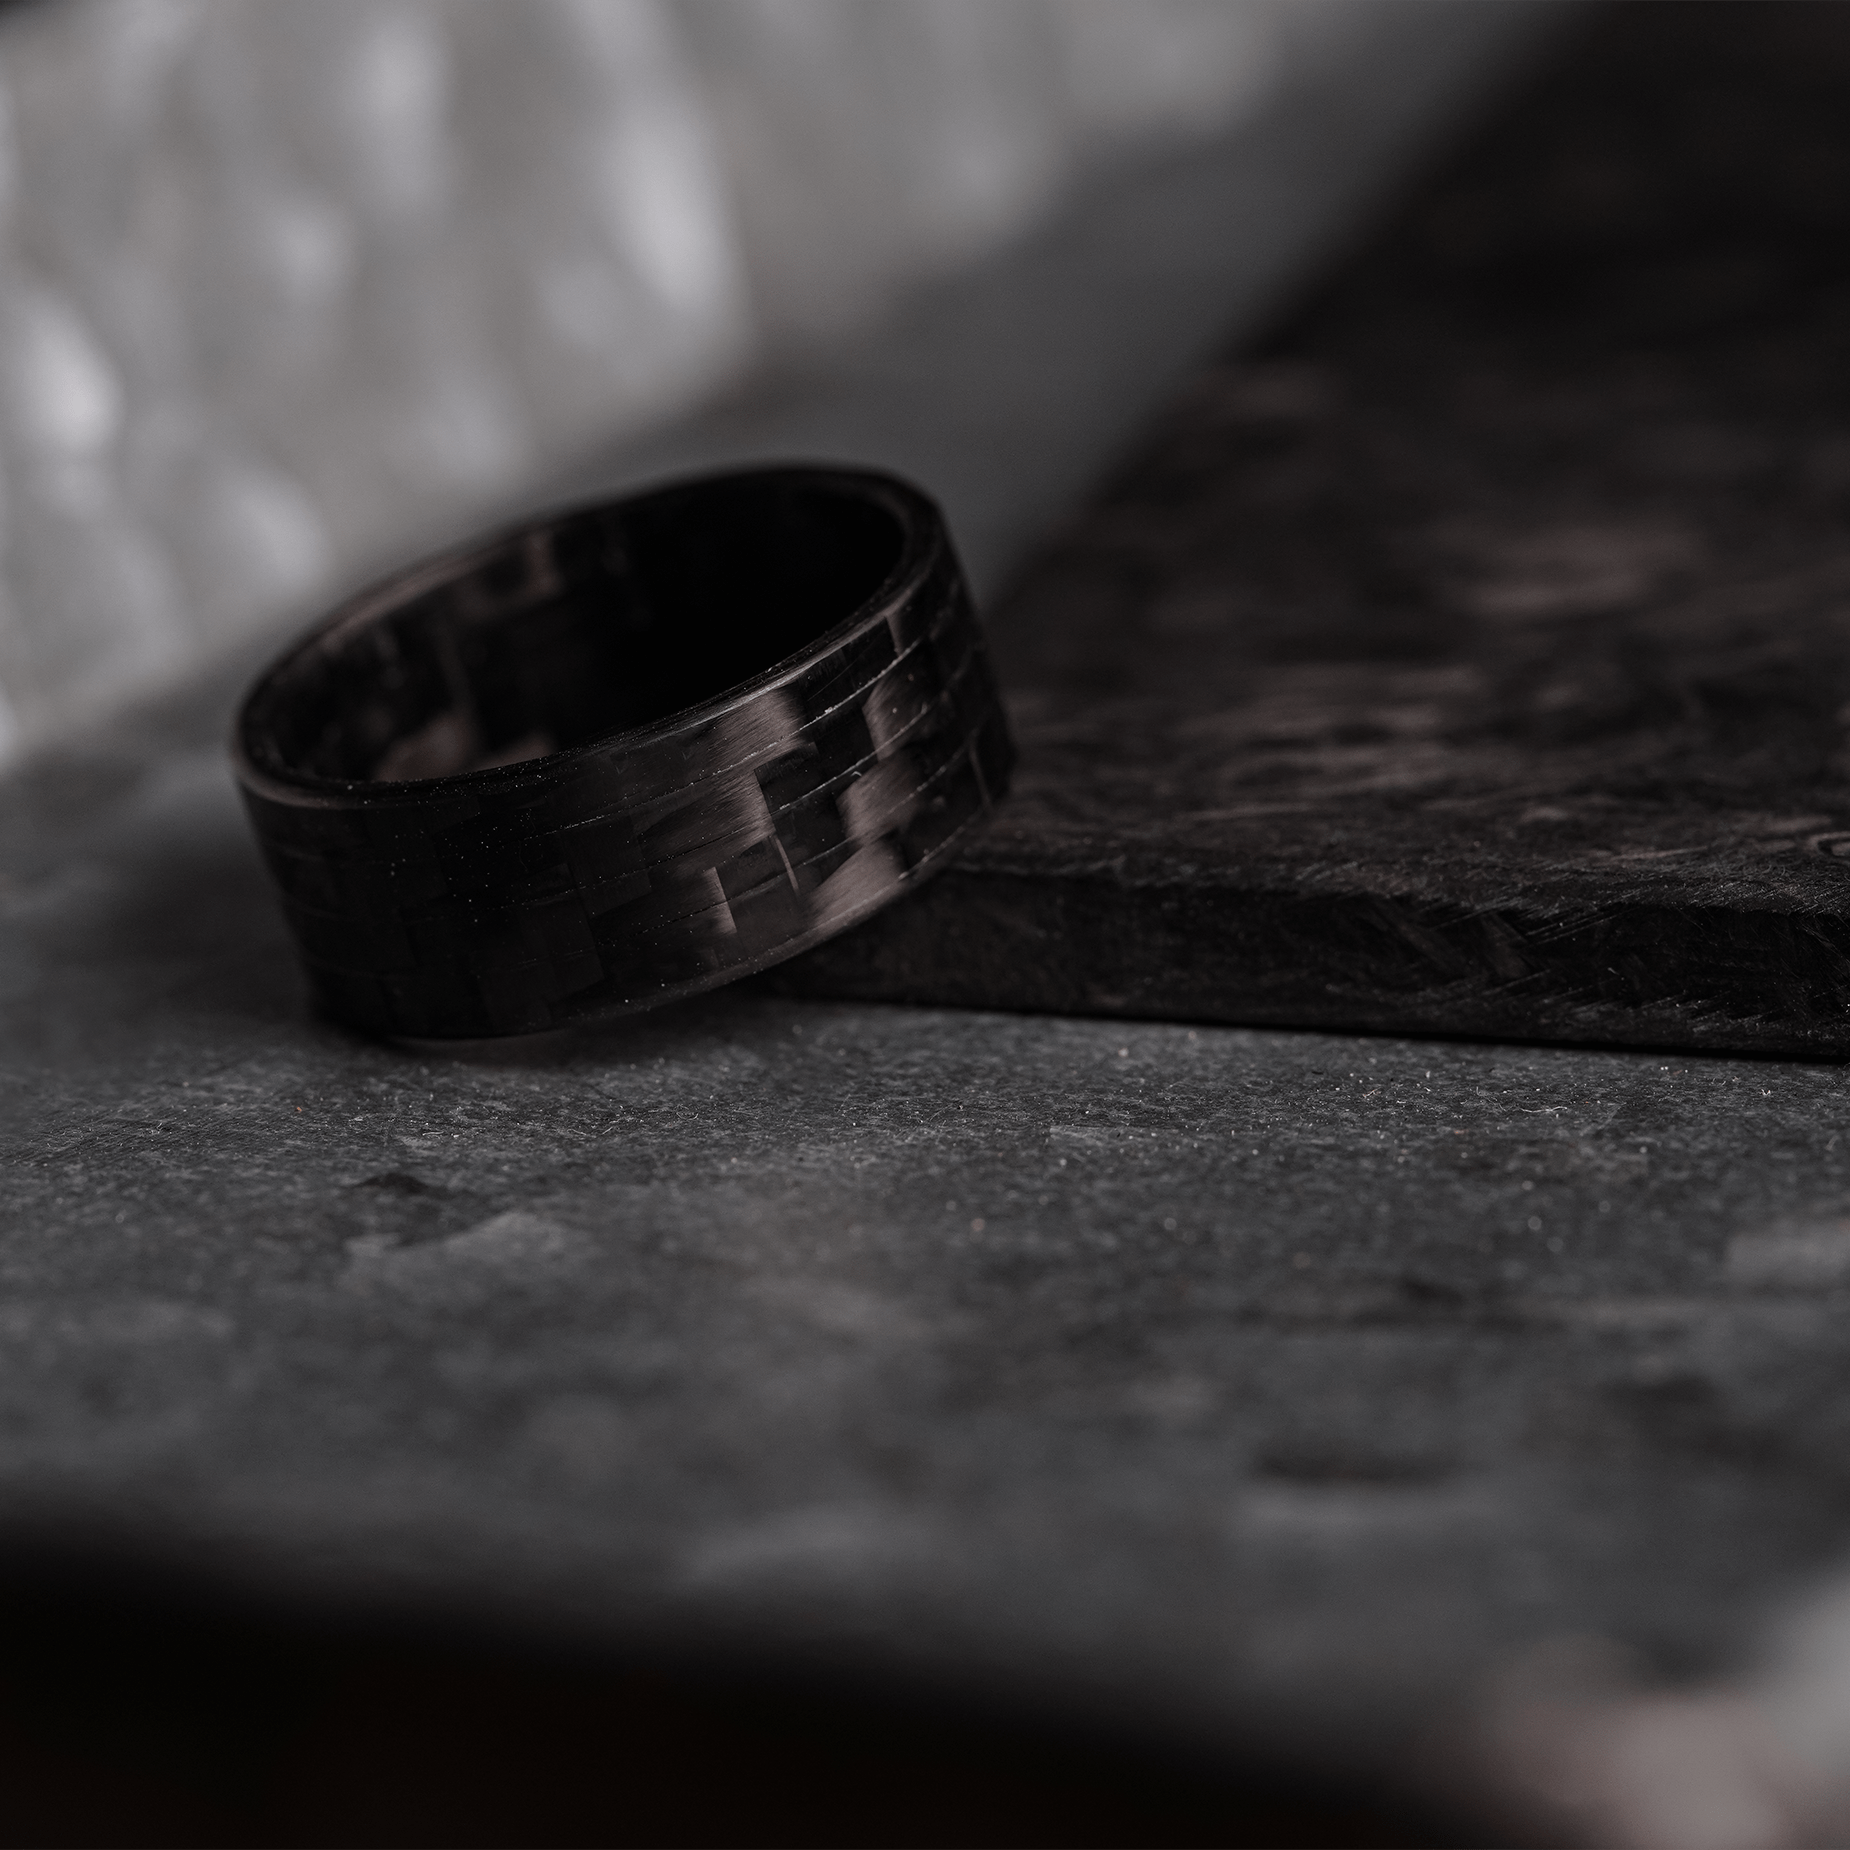 The Thunder - Men's Wedding Rings - Manly Bands